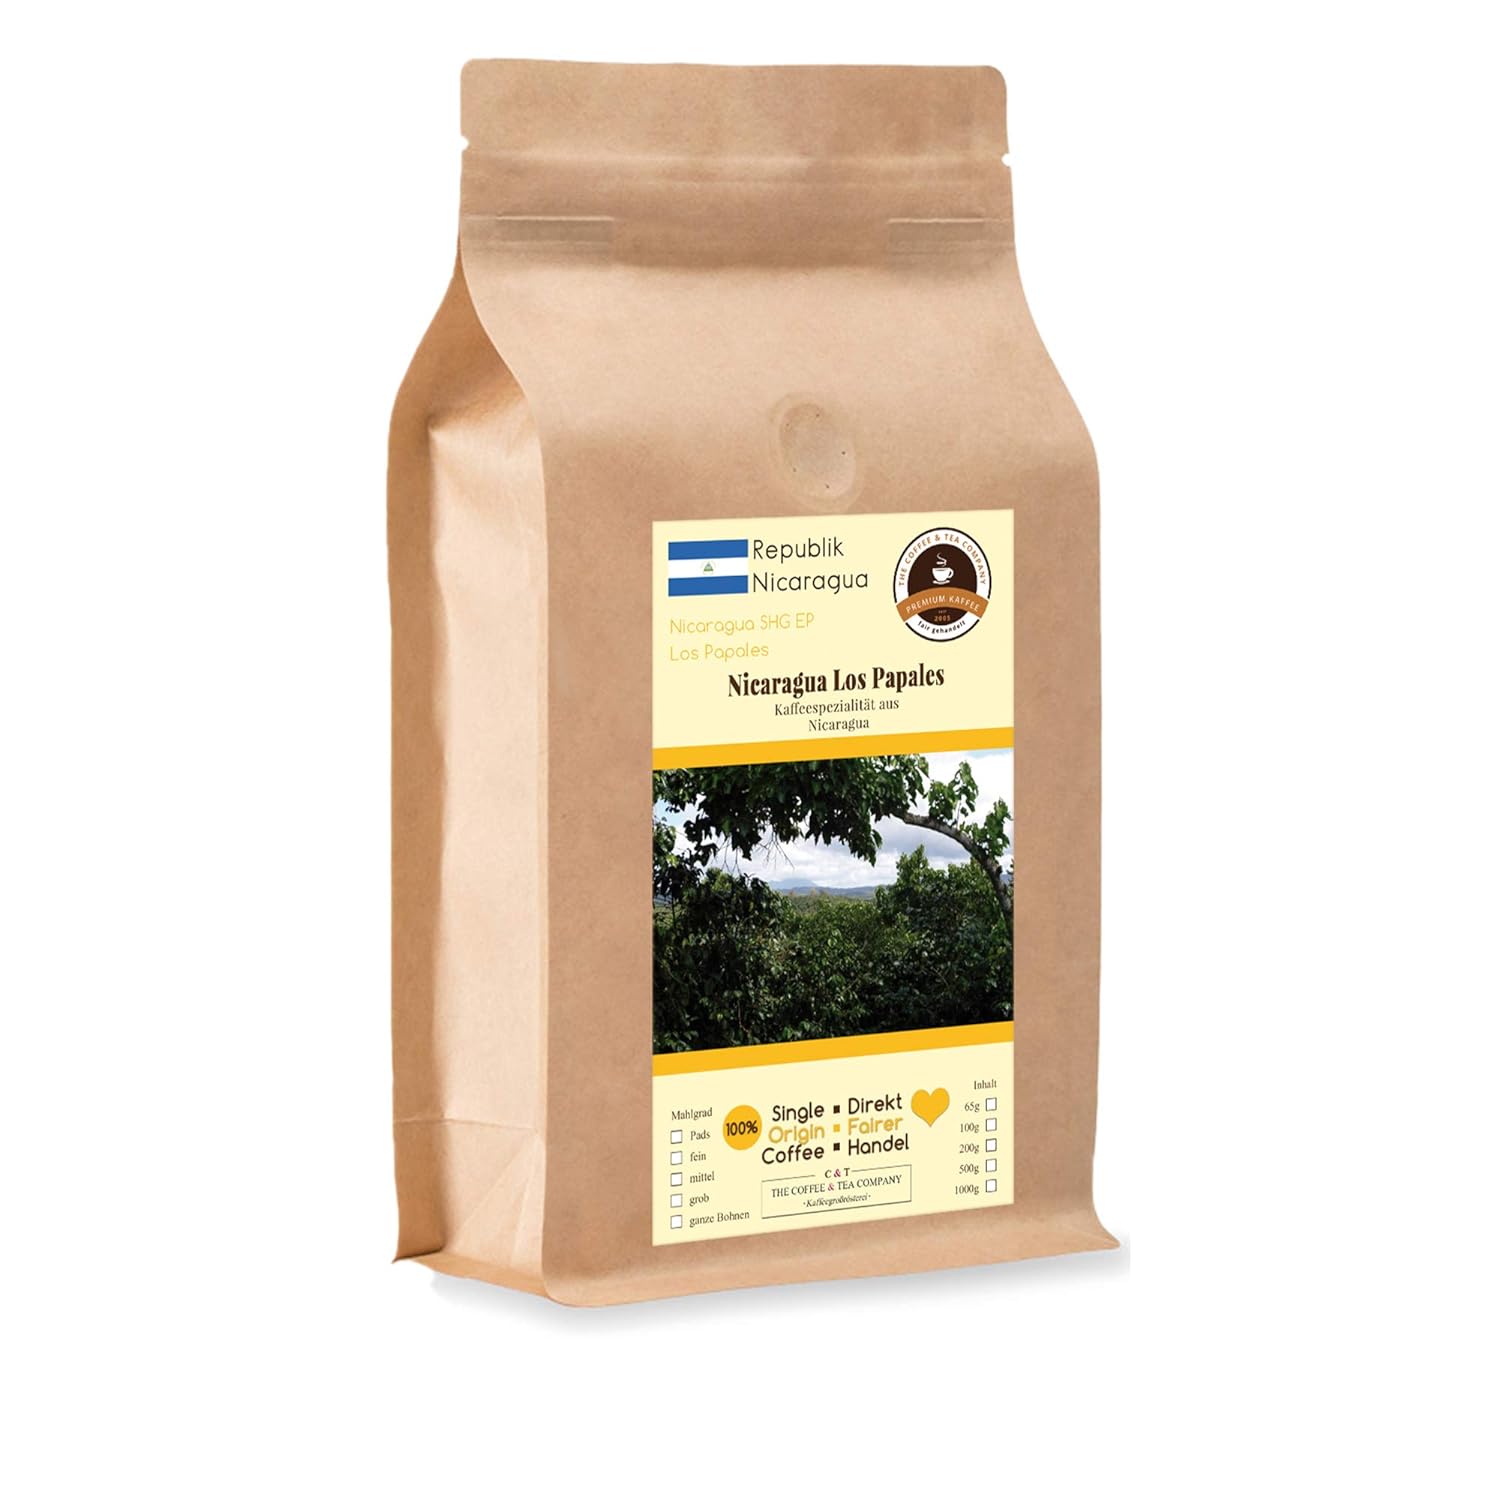 Coffee Globetrotter - Coffee with Heart - Nicaragua Los Papales - 500 g Medium Ground - for Coffee Filter Machine, Hand Filter - Top Coffee Fair Trade Supports Social Projects